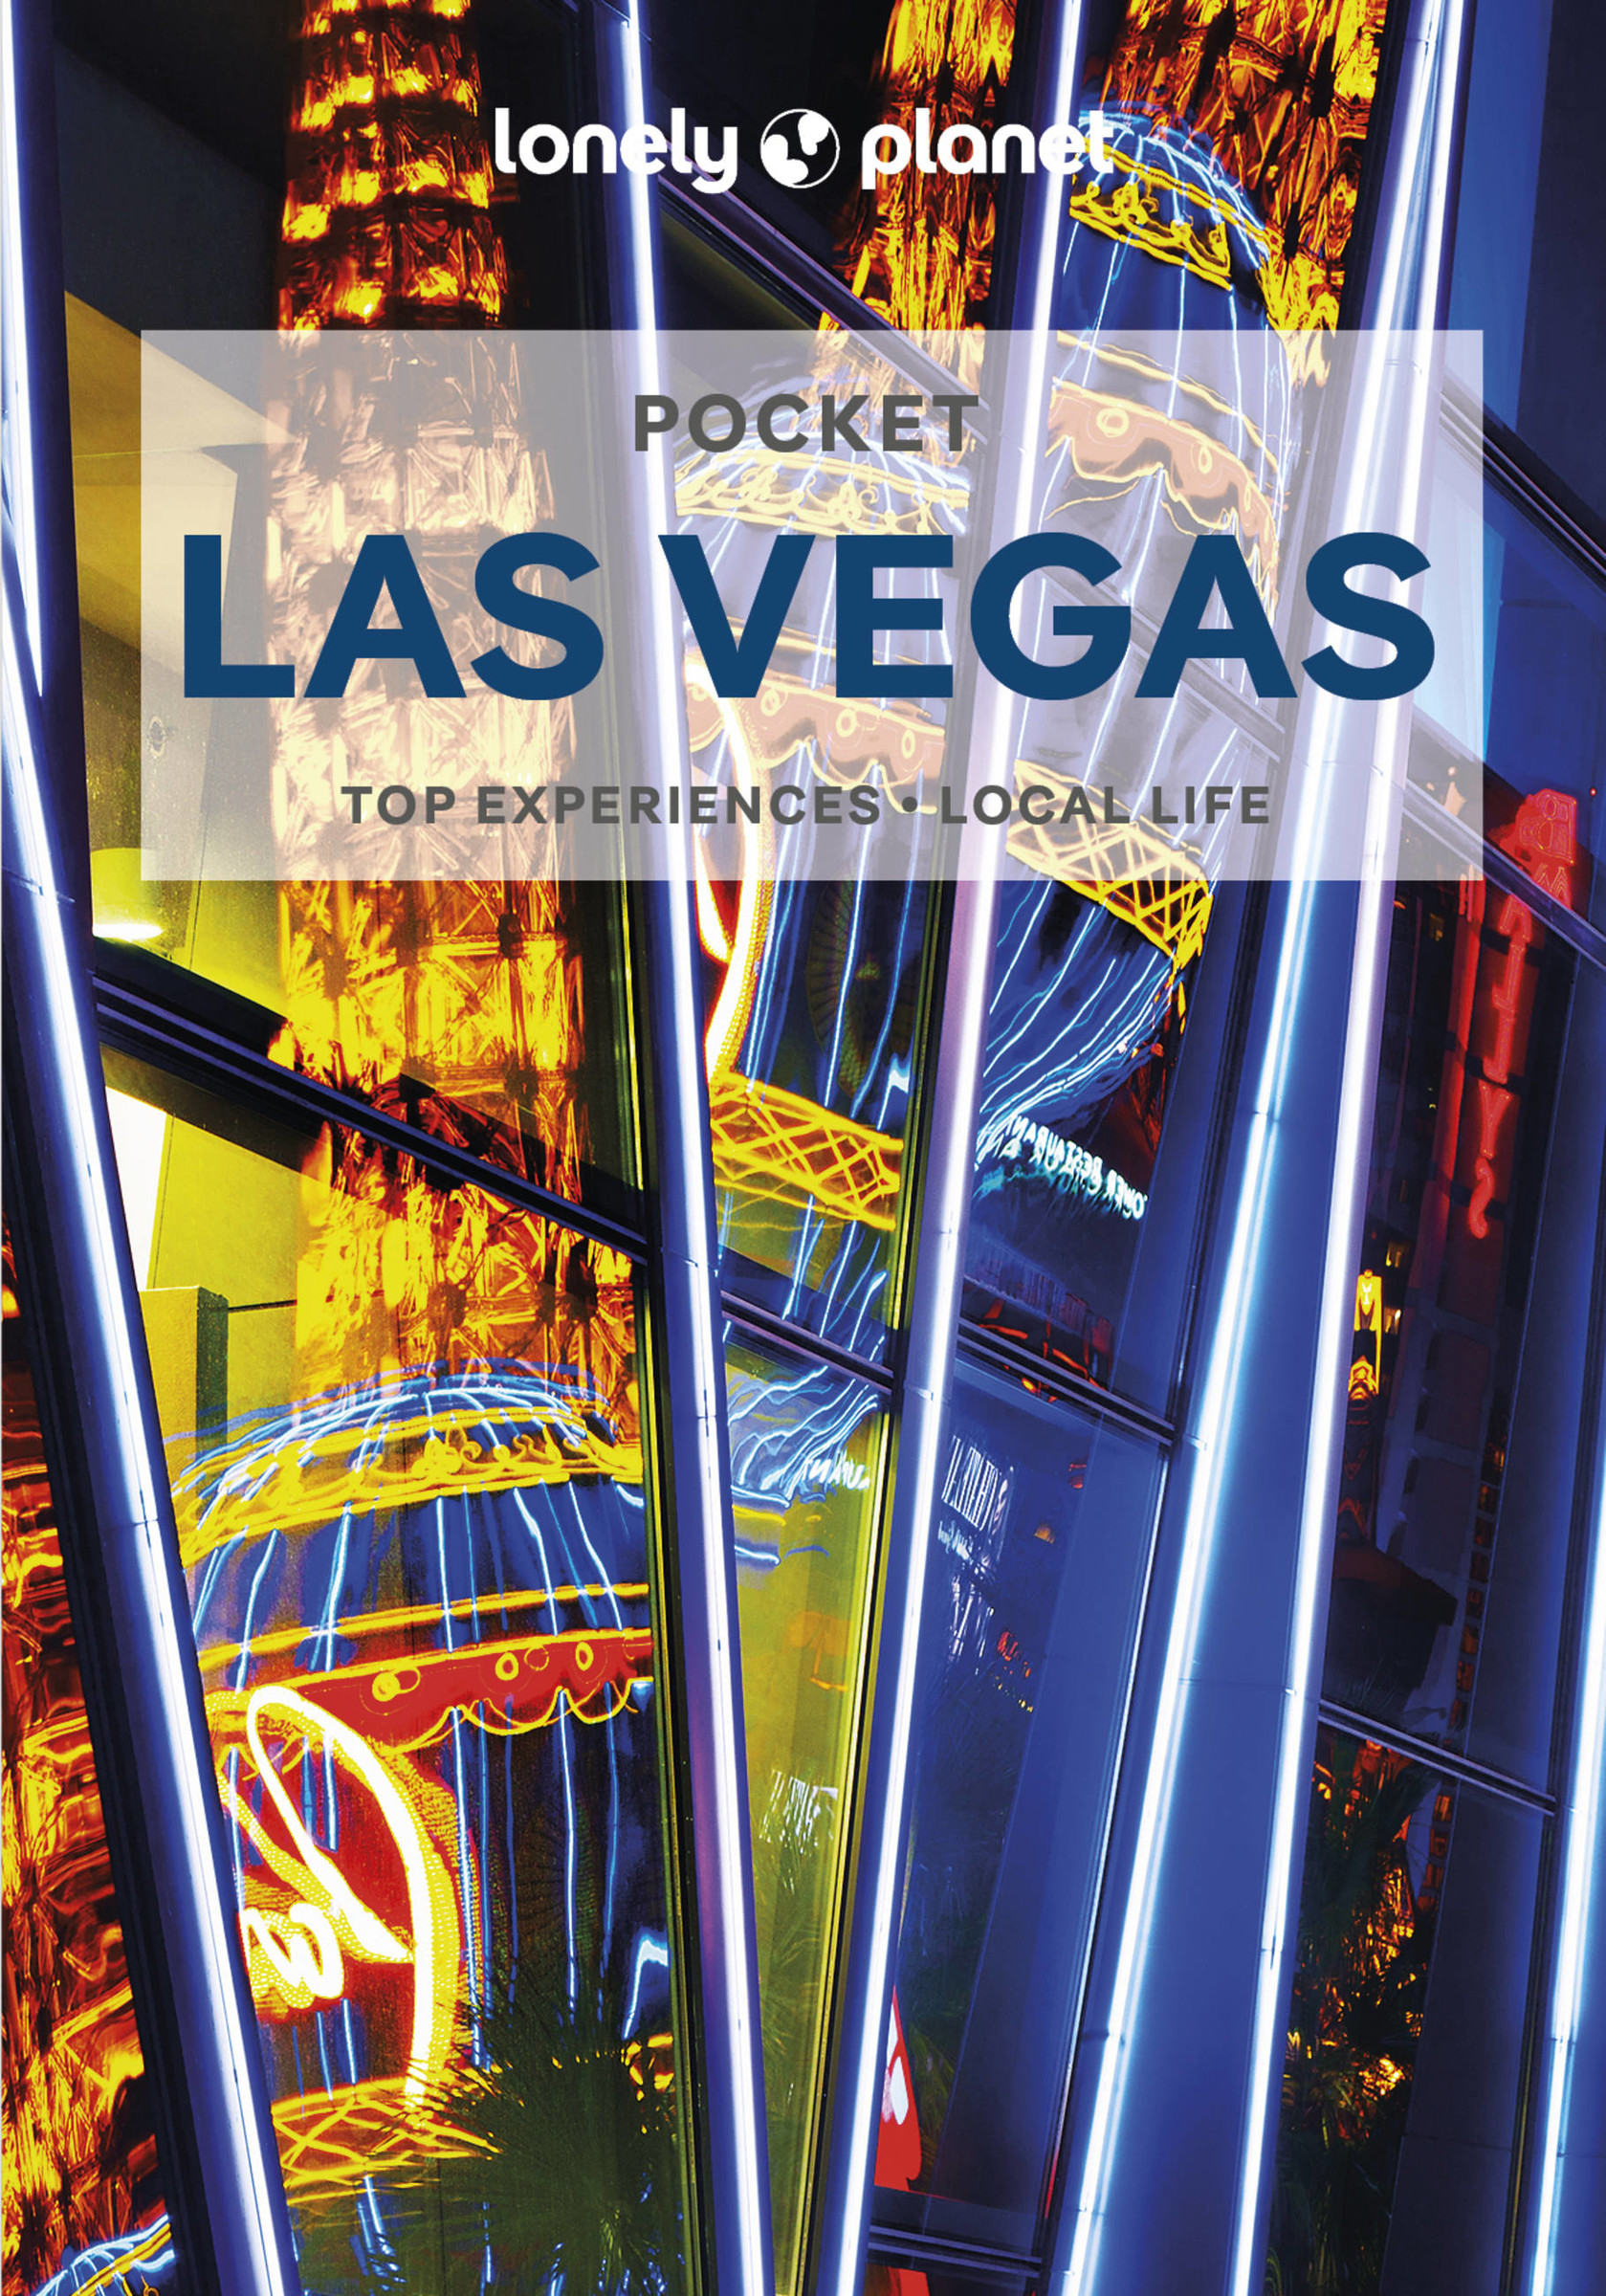 Lonely Planet Pocket Las Vegas 6 6th Ed. | Schulte-Peevers, Andrea